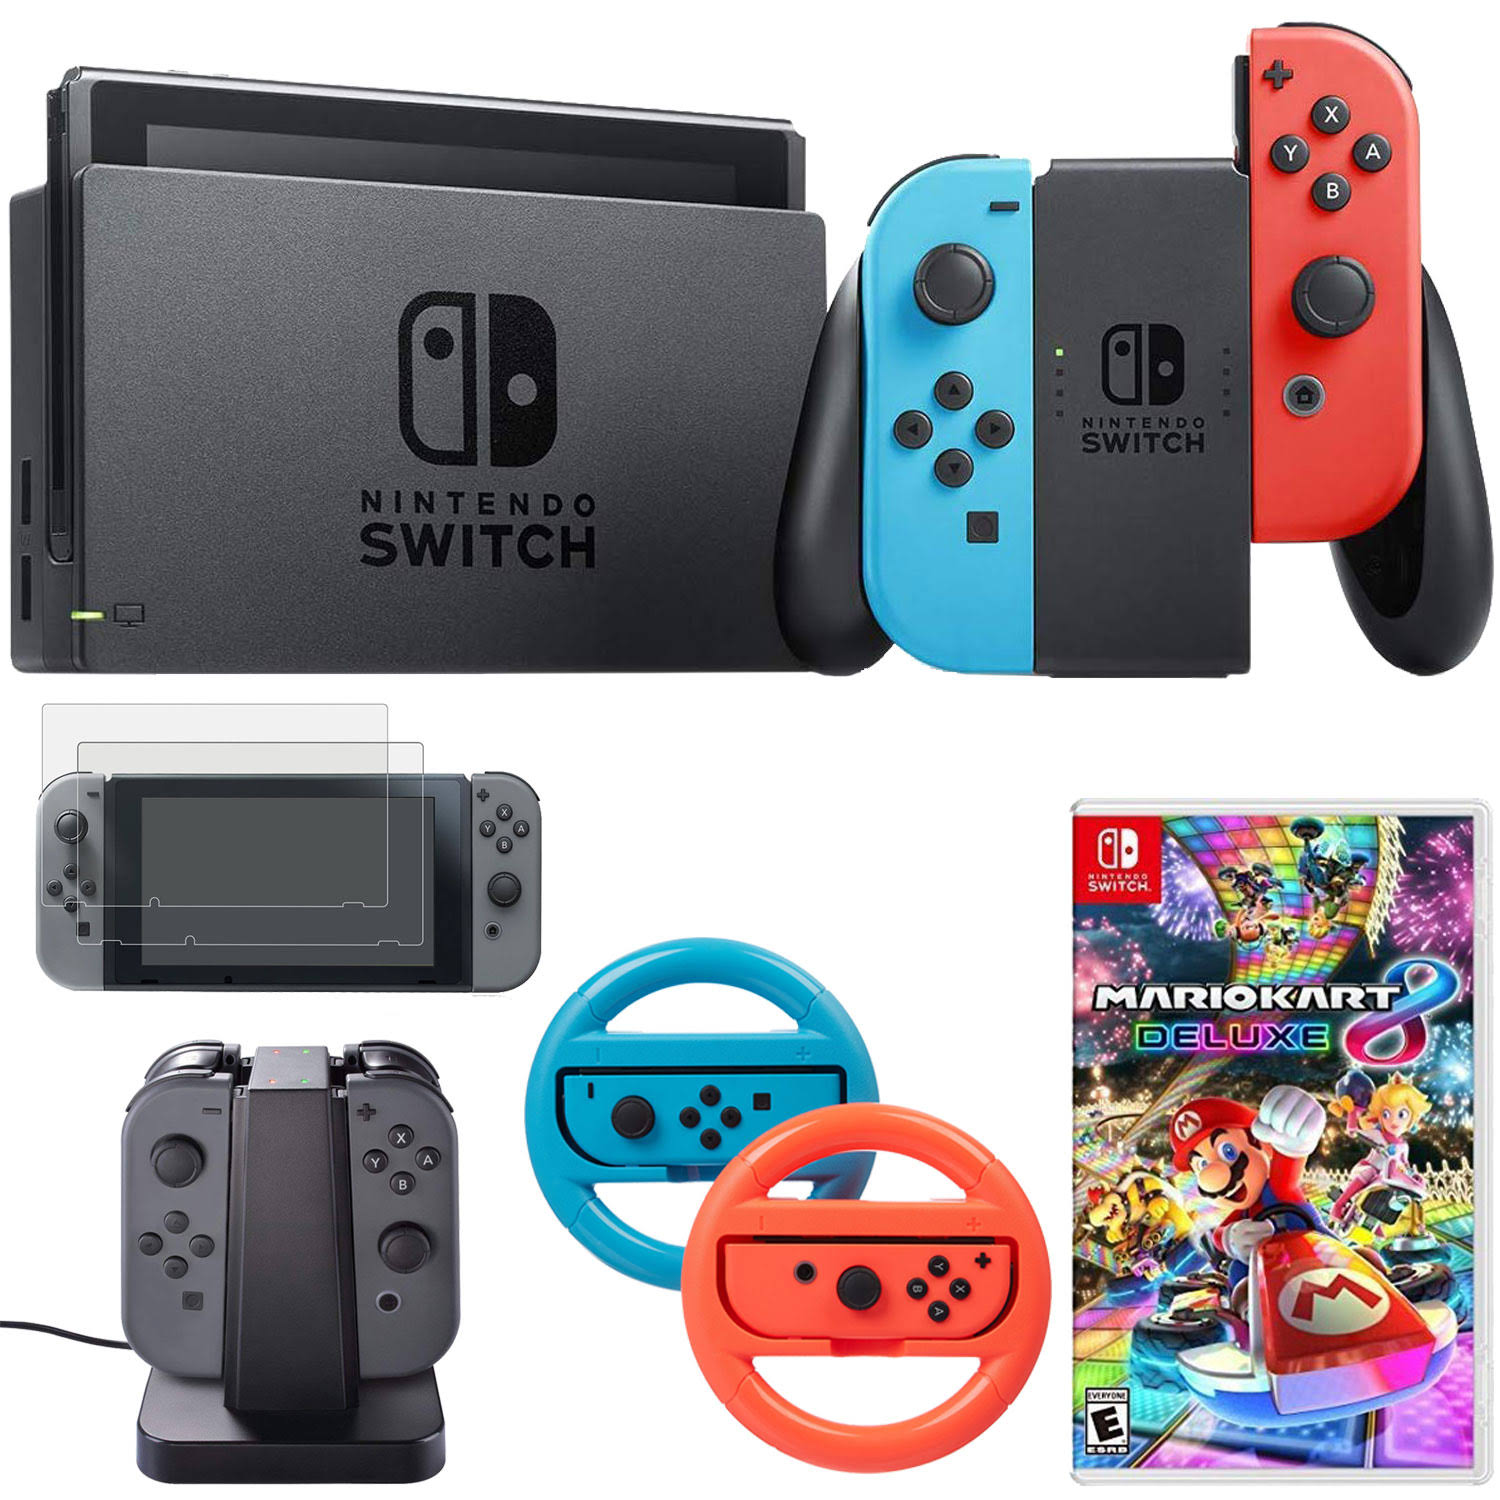 Nintendo Switch 32 Gb Console With Neon Blue And Red Joy Con Mario Kart 8 Deluxe Bundle Hrazda 9733